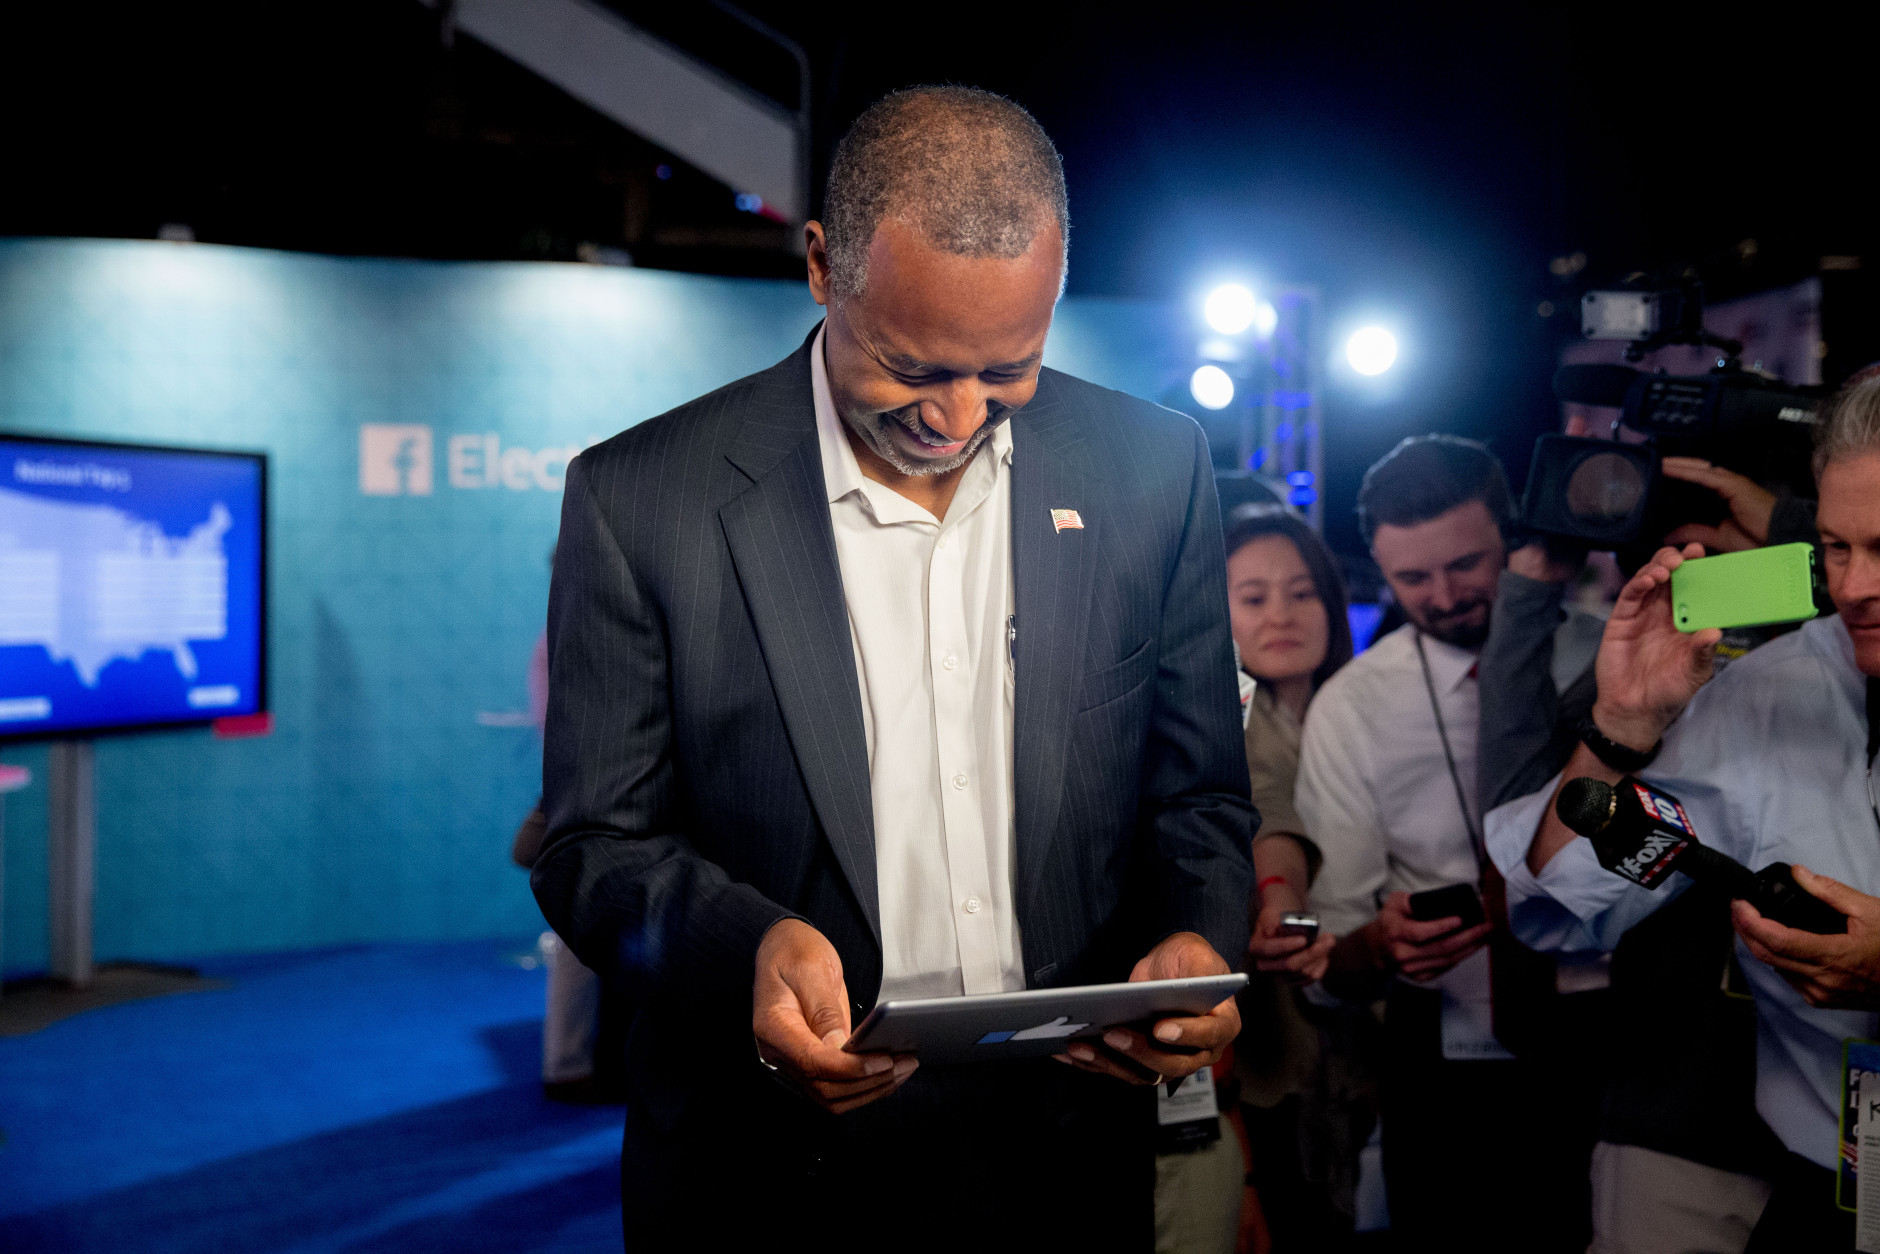 Republican presidential candidate Ben Carson participates in a rapid fire Q&amp;A with Facebook at their lounge at Quicken Loans Arena in Cleveland, Thursday, Aug. 6, 2015, before tonight's first Republican presidential debate. (AP Photo/Andrew Harnik)